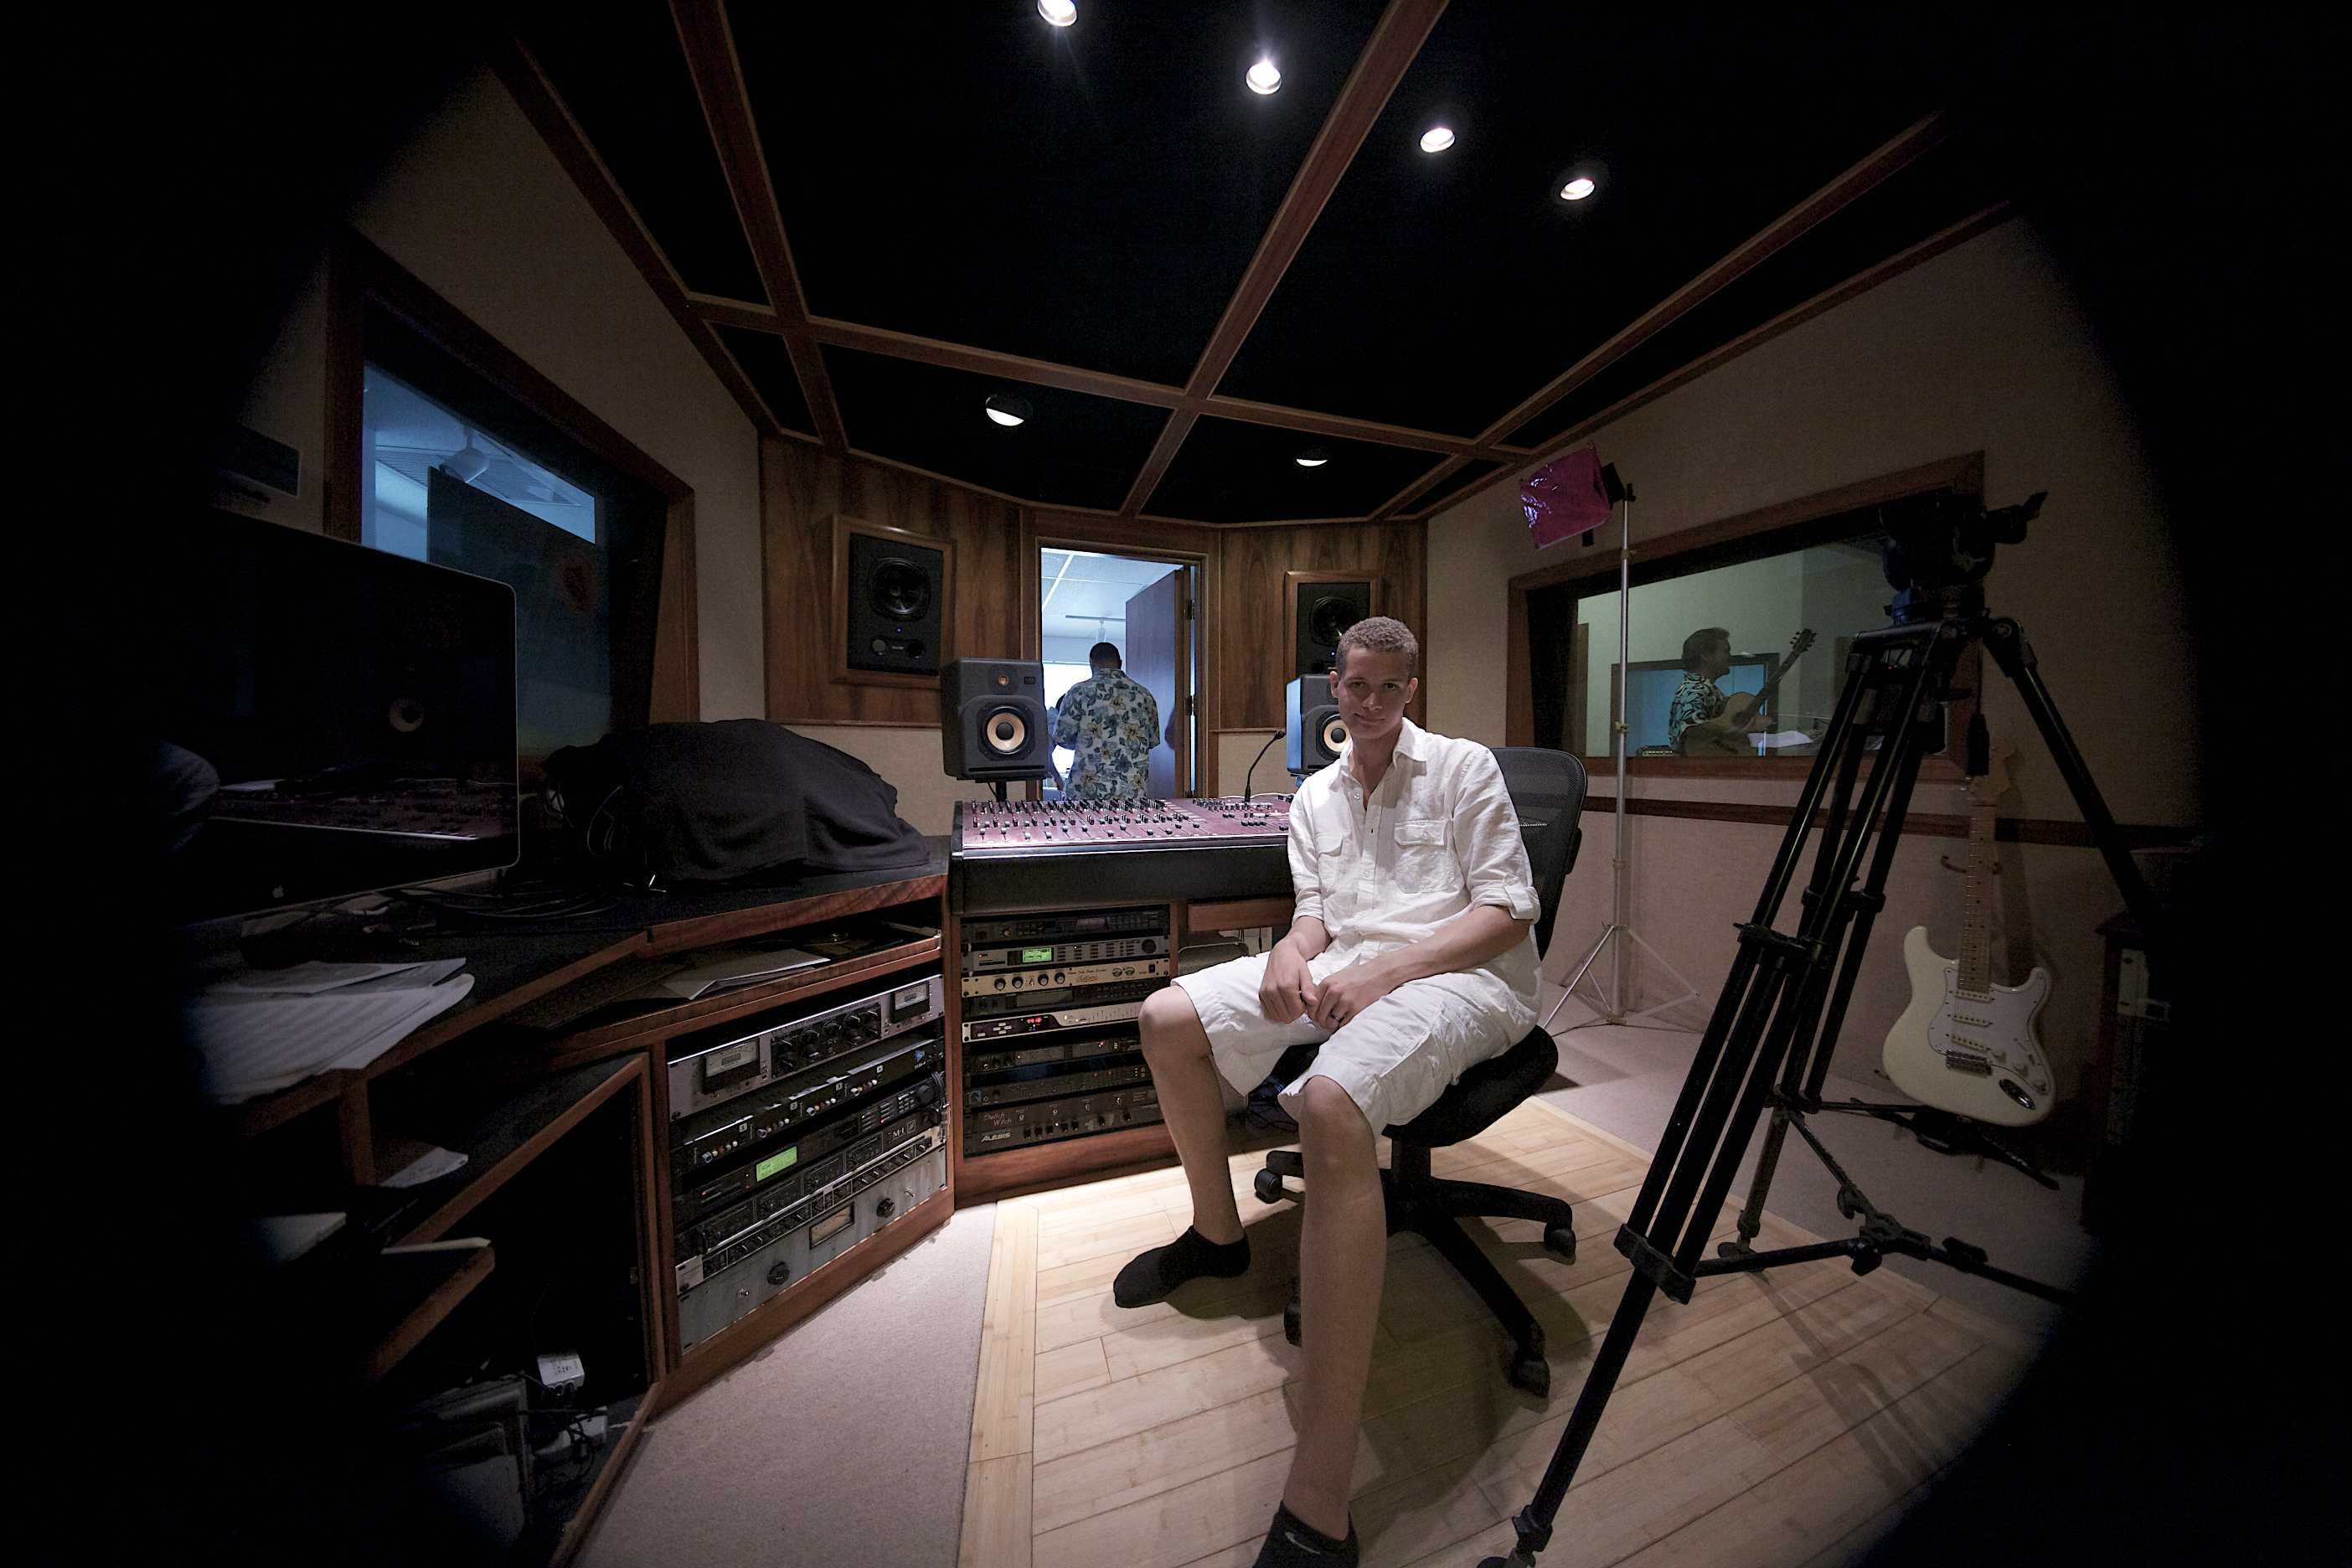 Working on ADR, final mixes, and publicly work on the Big Island of Hawaii.